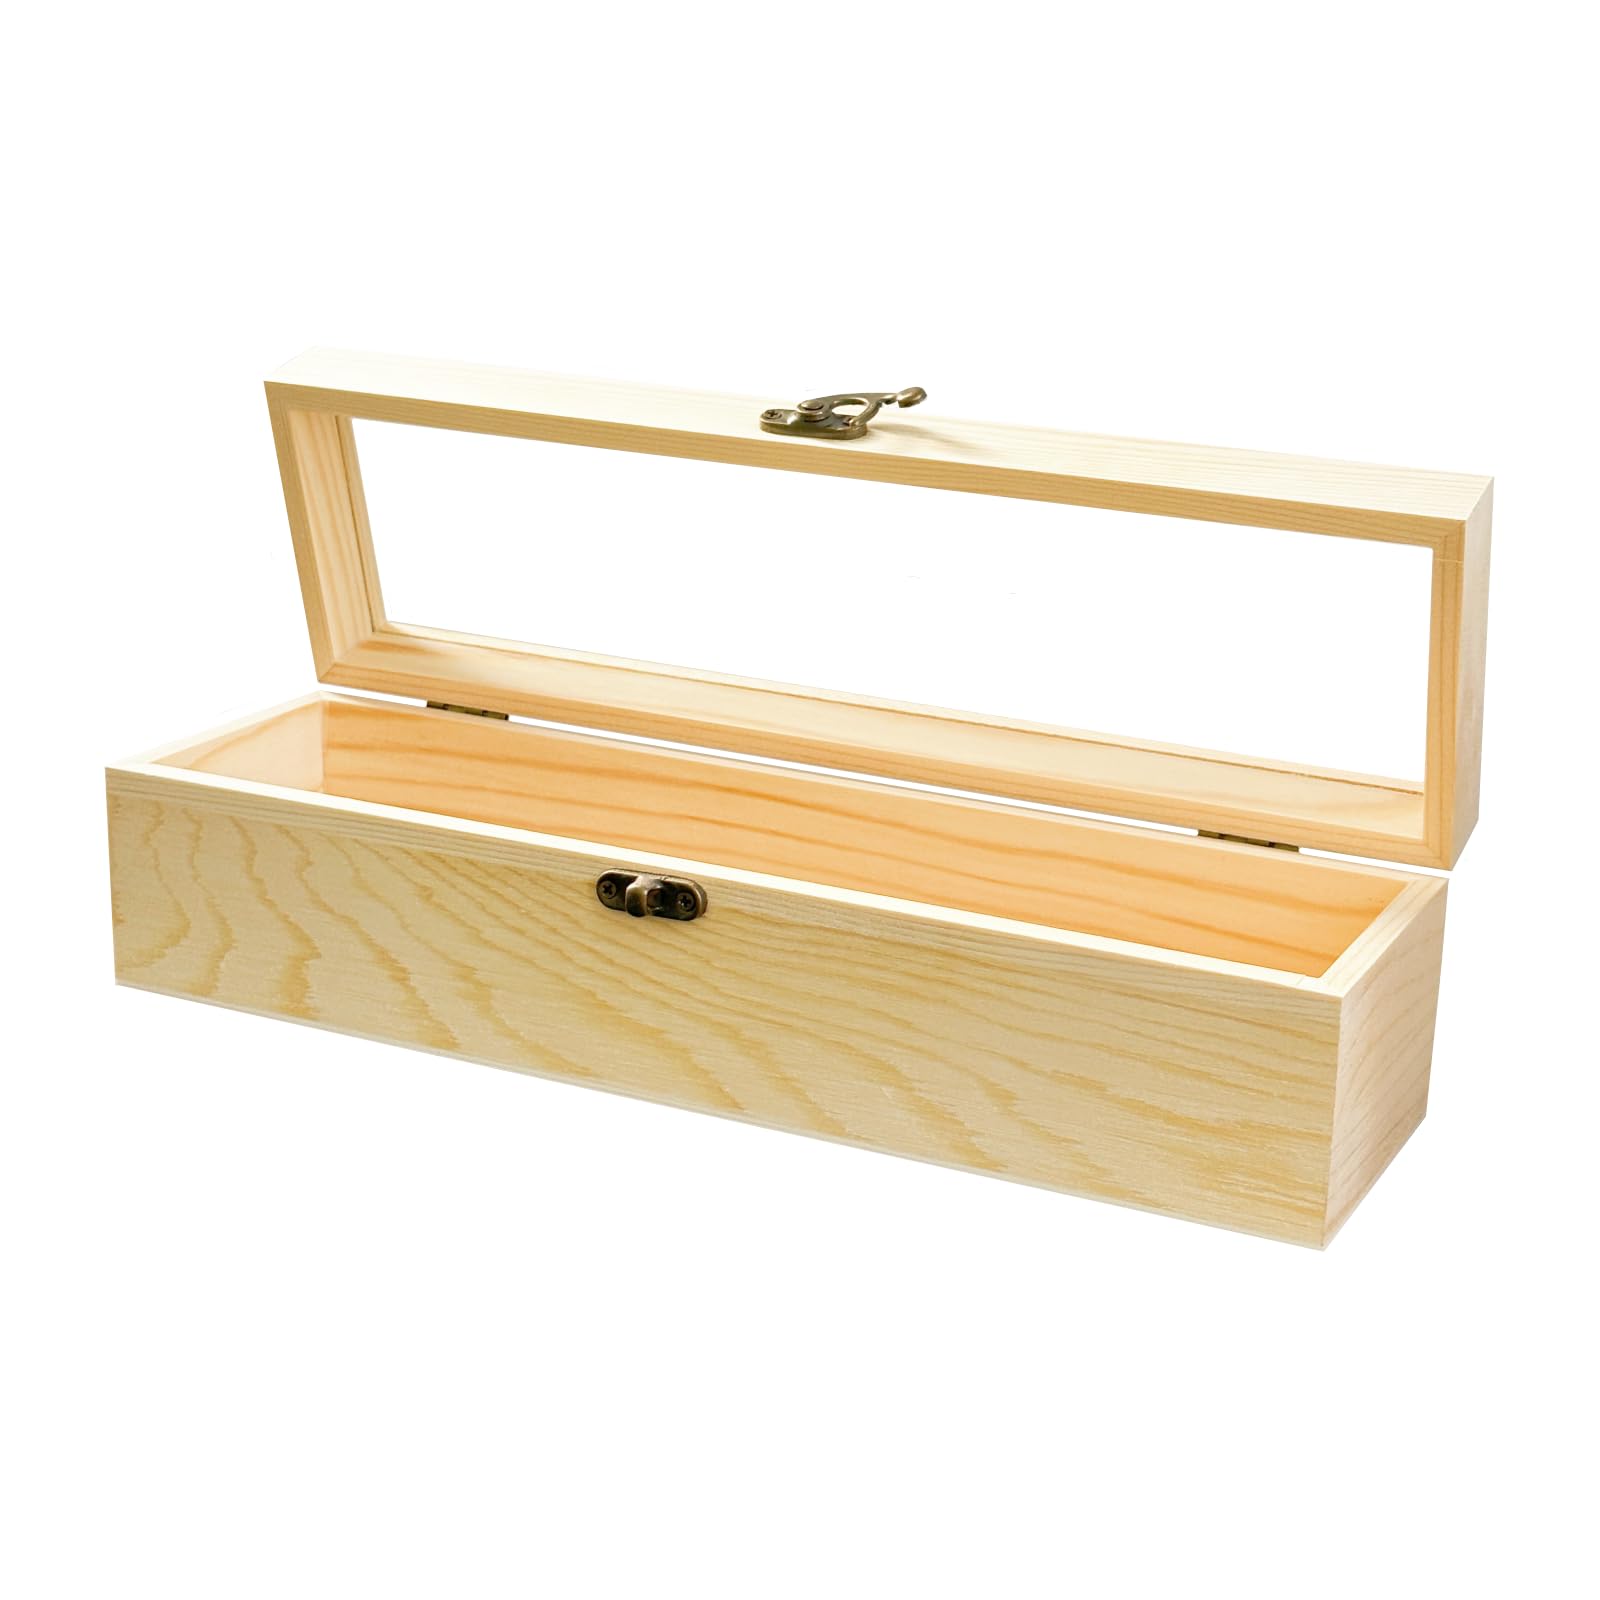 HAN SHENG 11.8'x3.4'x3.2' Unfinished Wood Gift Box Window Wooden Box with Hinged Lid Tiny Wooden Box for Arts Crafts Birthday Party Favor Jewelry Box